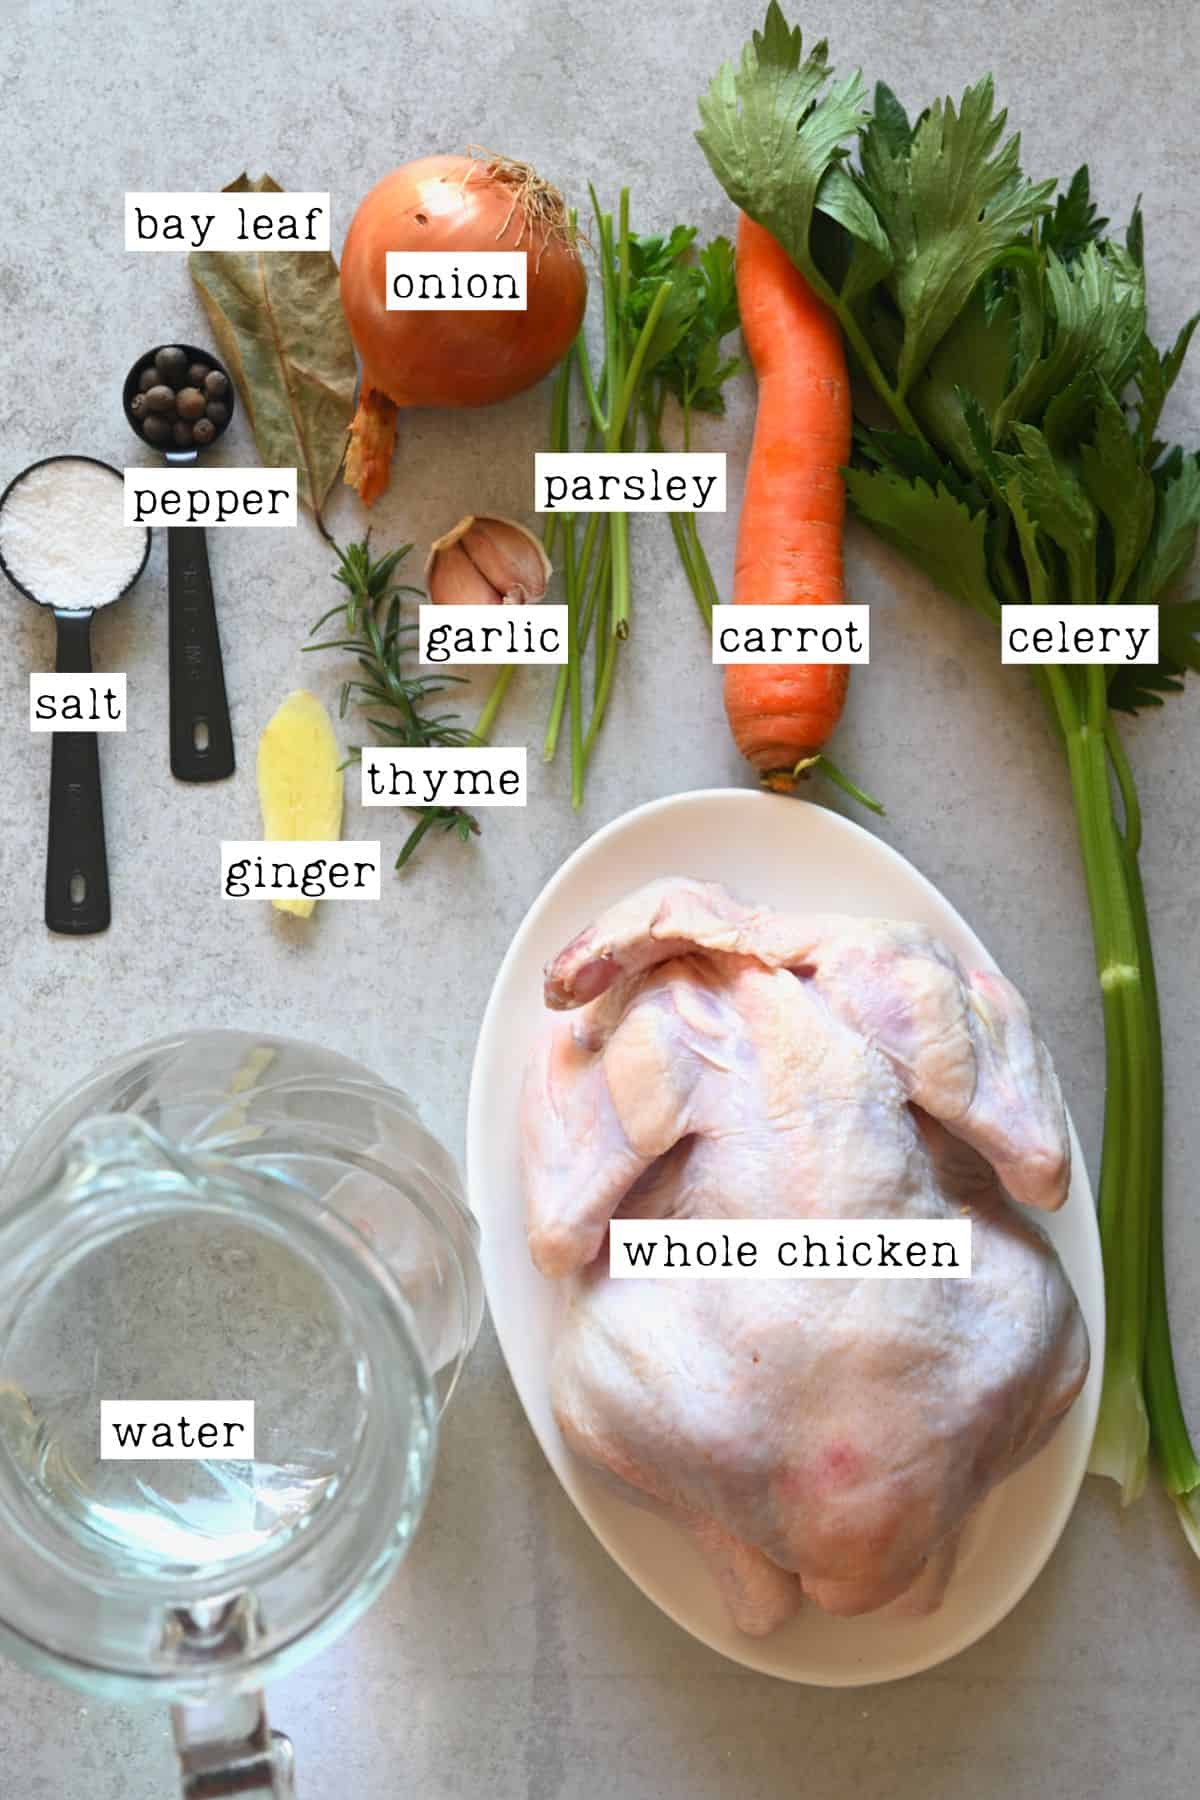 Ingredients for chicken broth